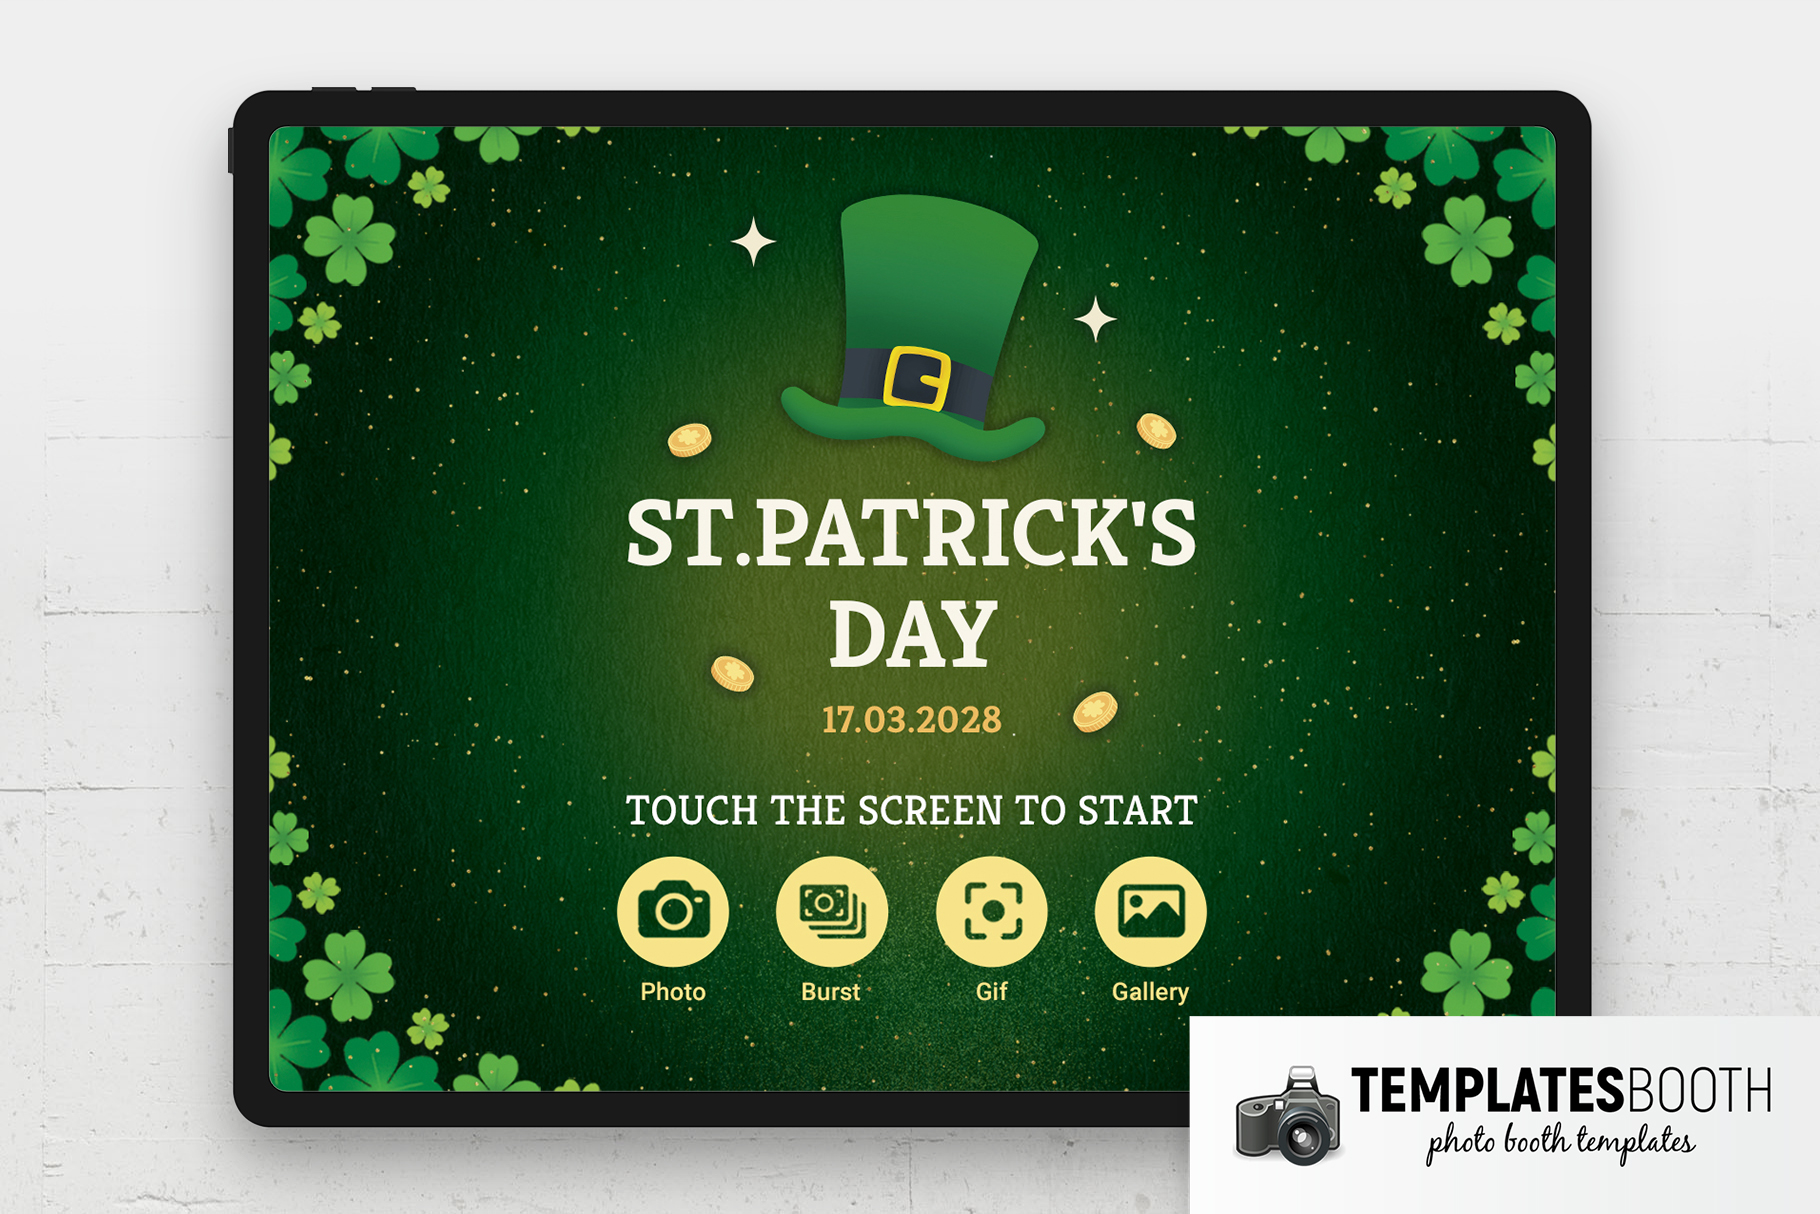 St. Patrick Day Photo Booth Welcome Screen